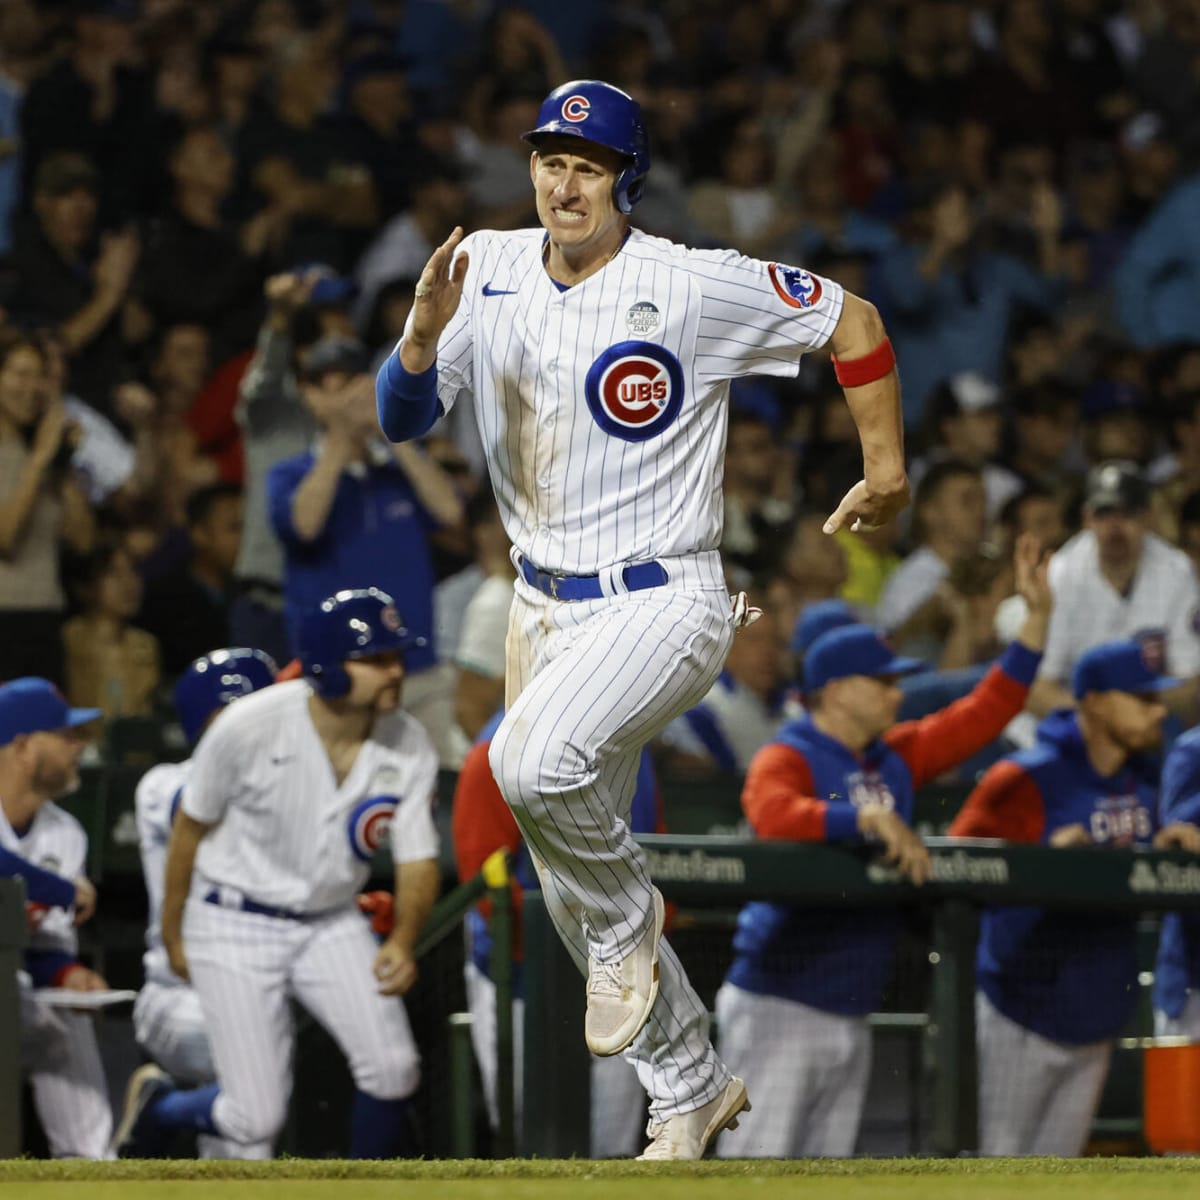 Livingston Native Frank Schwindel Makes an Impact for Chicago Cubs